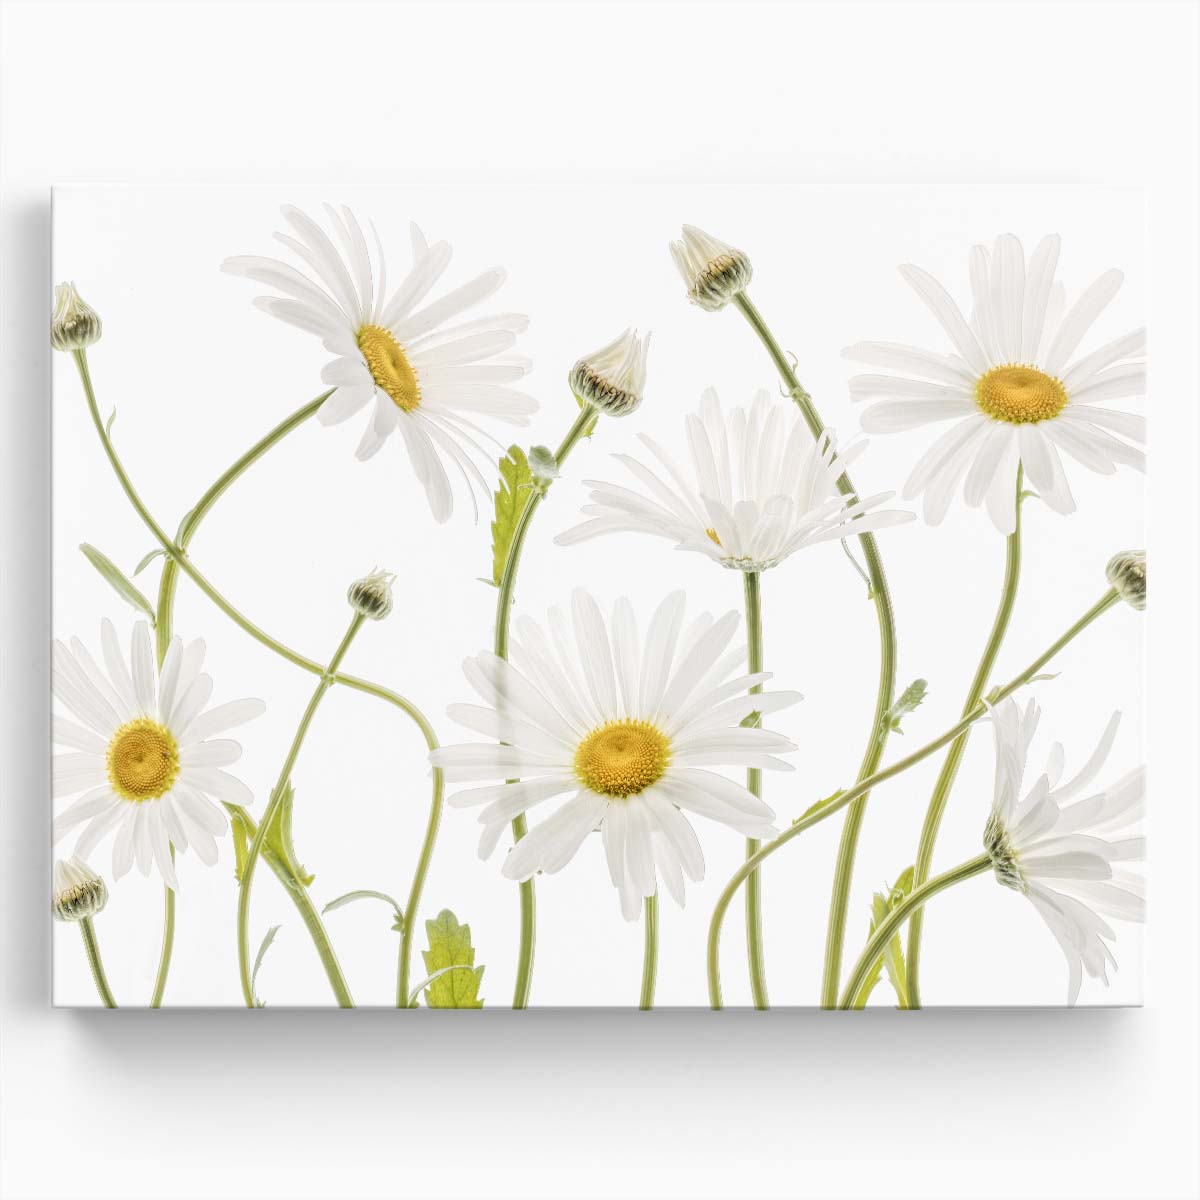 Mandy Disher's Floral Macro Photography Ox Eye Daisies Wall Art by Luxuriance Designs. Made in USA.